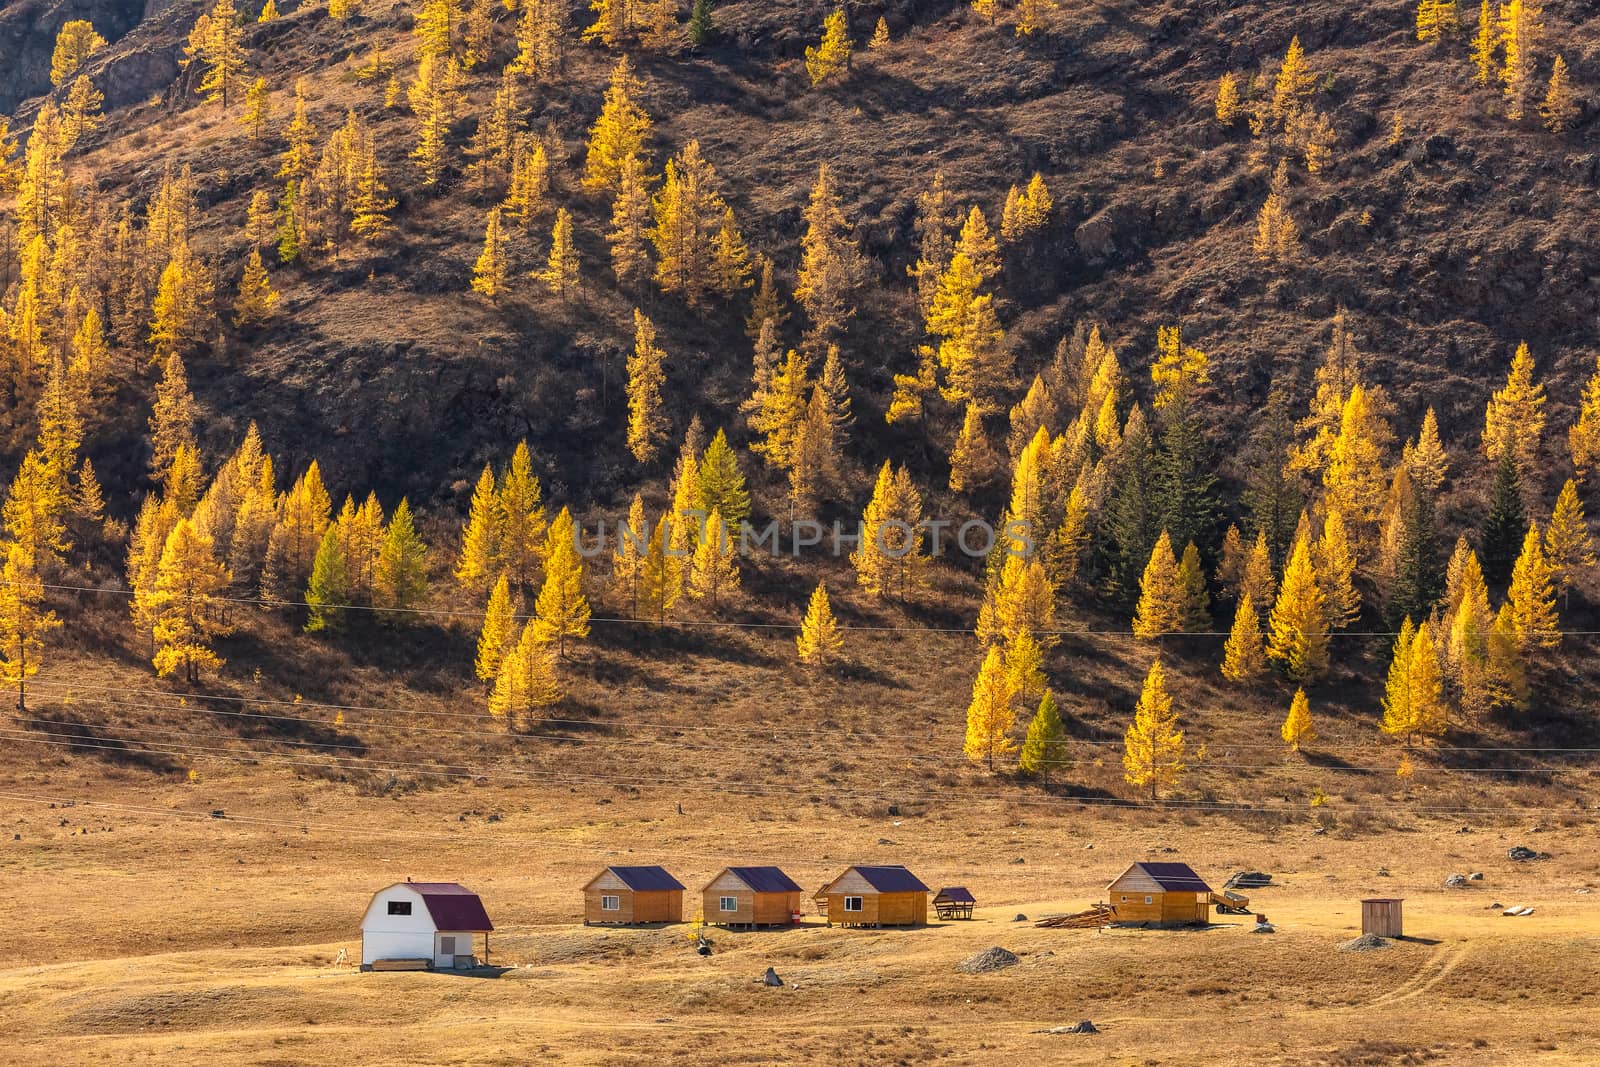 Altai mountains. Beautiful highland autumn panoramic landscape. Wooden huts in the foreground. Mountain slopes covered with golden trees in the background. Russia. Siberia by DamantisZ